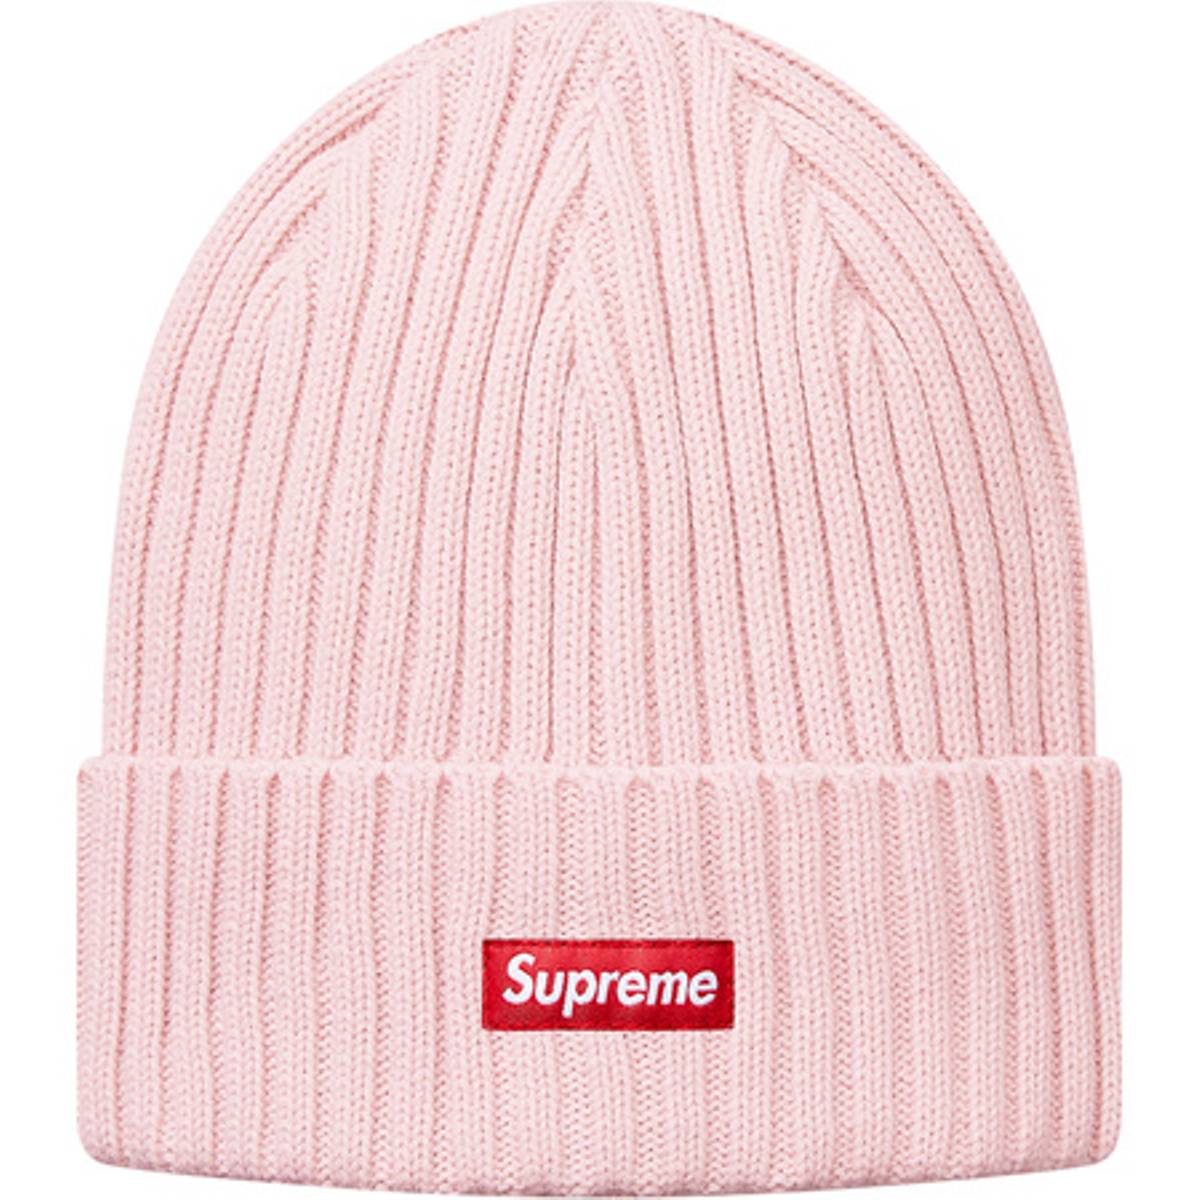 supreme overdyed beanie pink